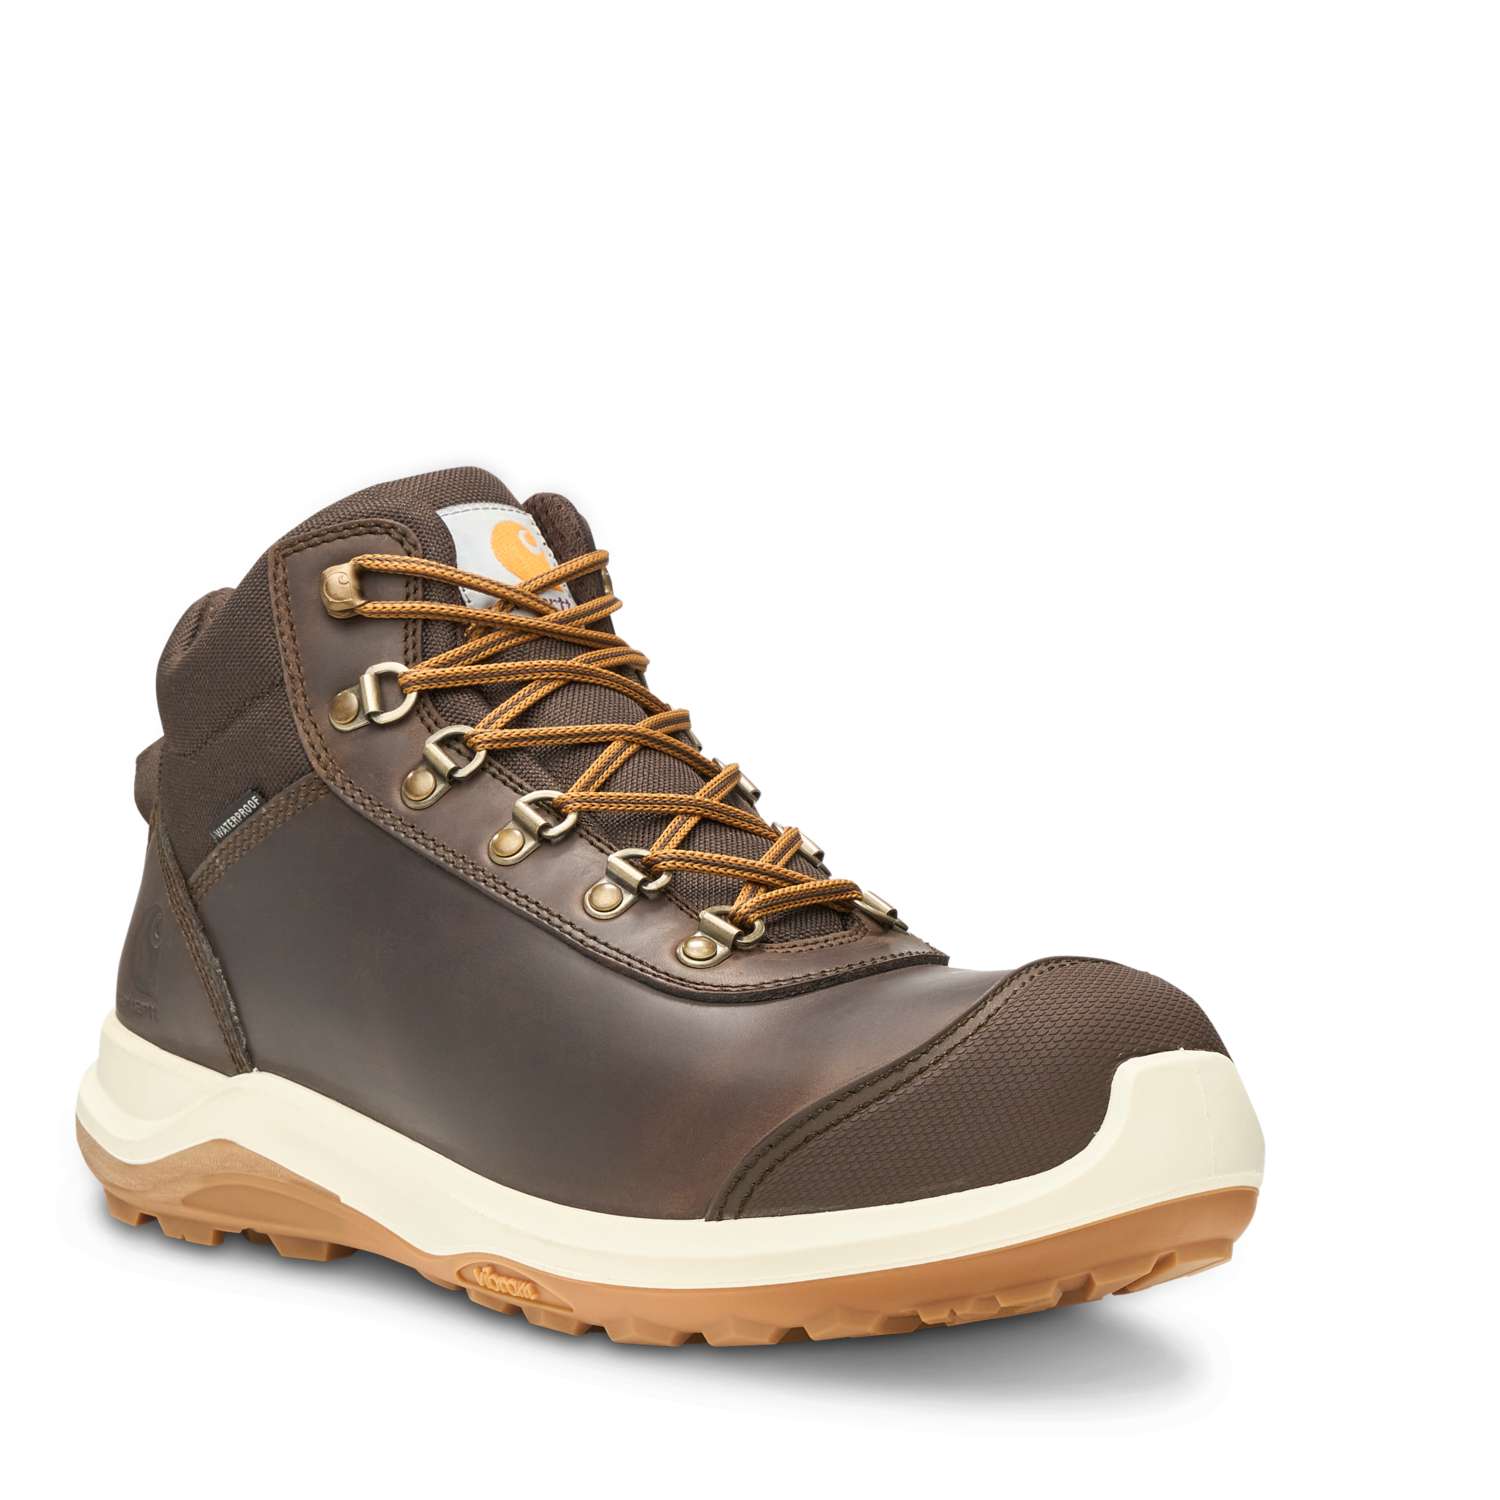 WYLIE_WATERPROOF_S3_SAFETY_BOOT_Y1bs0wyIxG